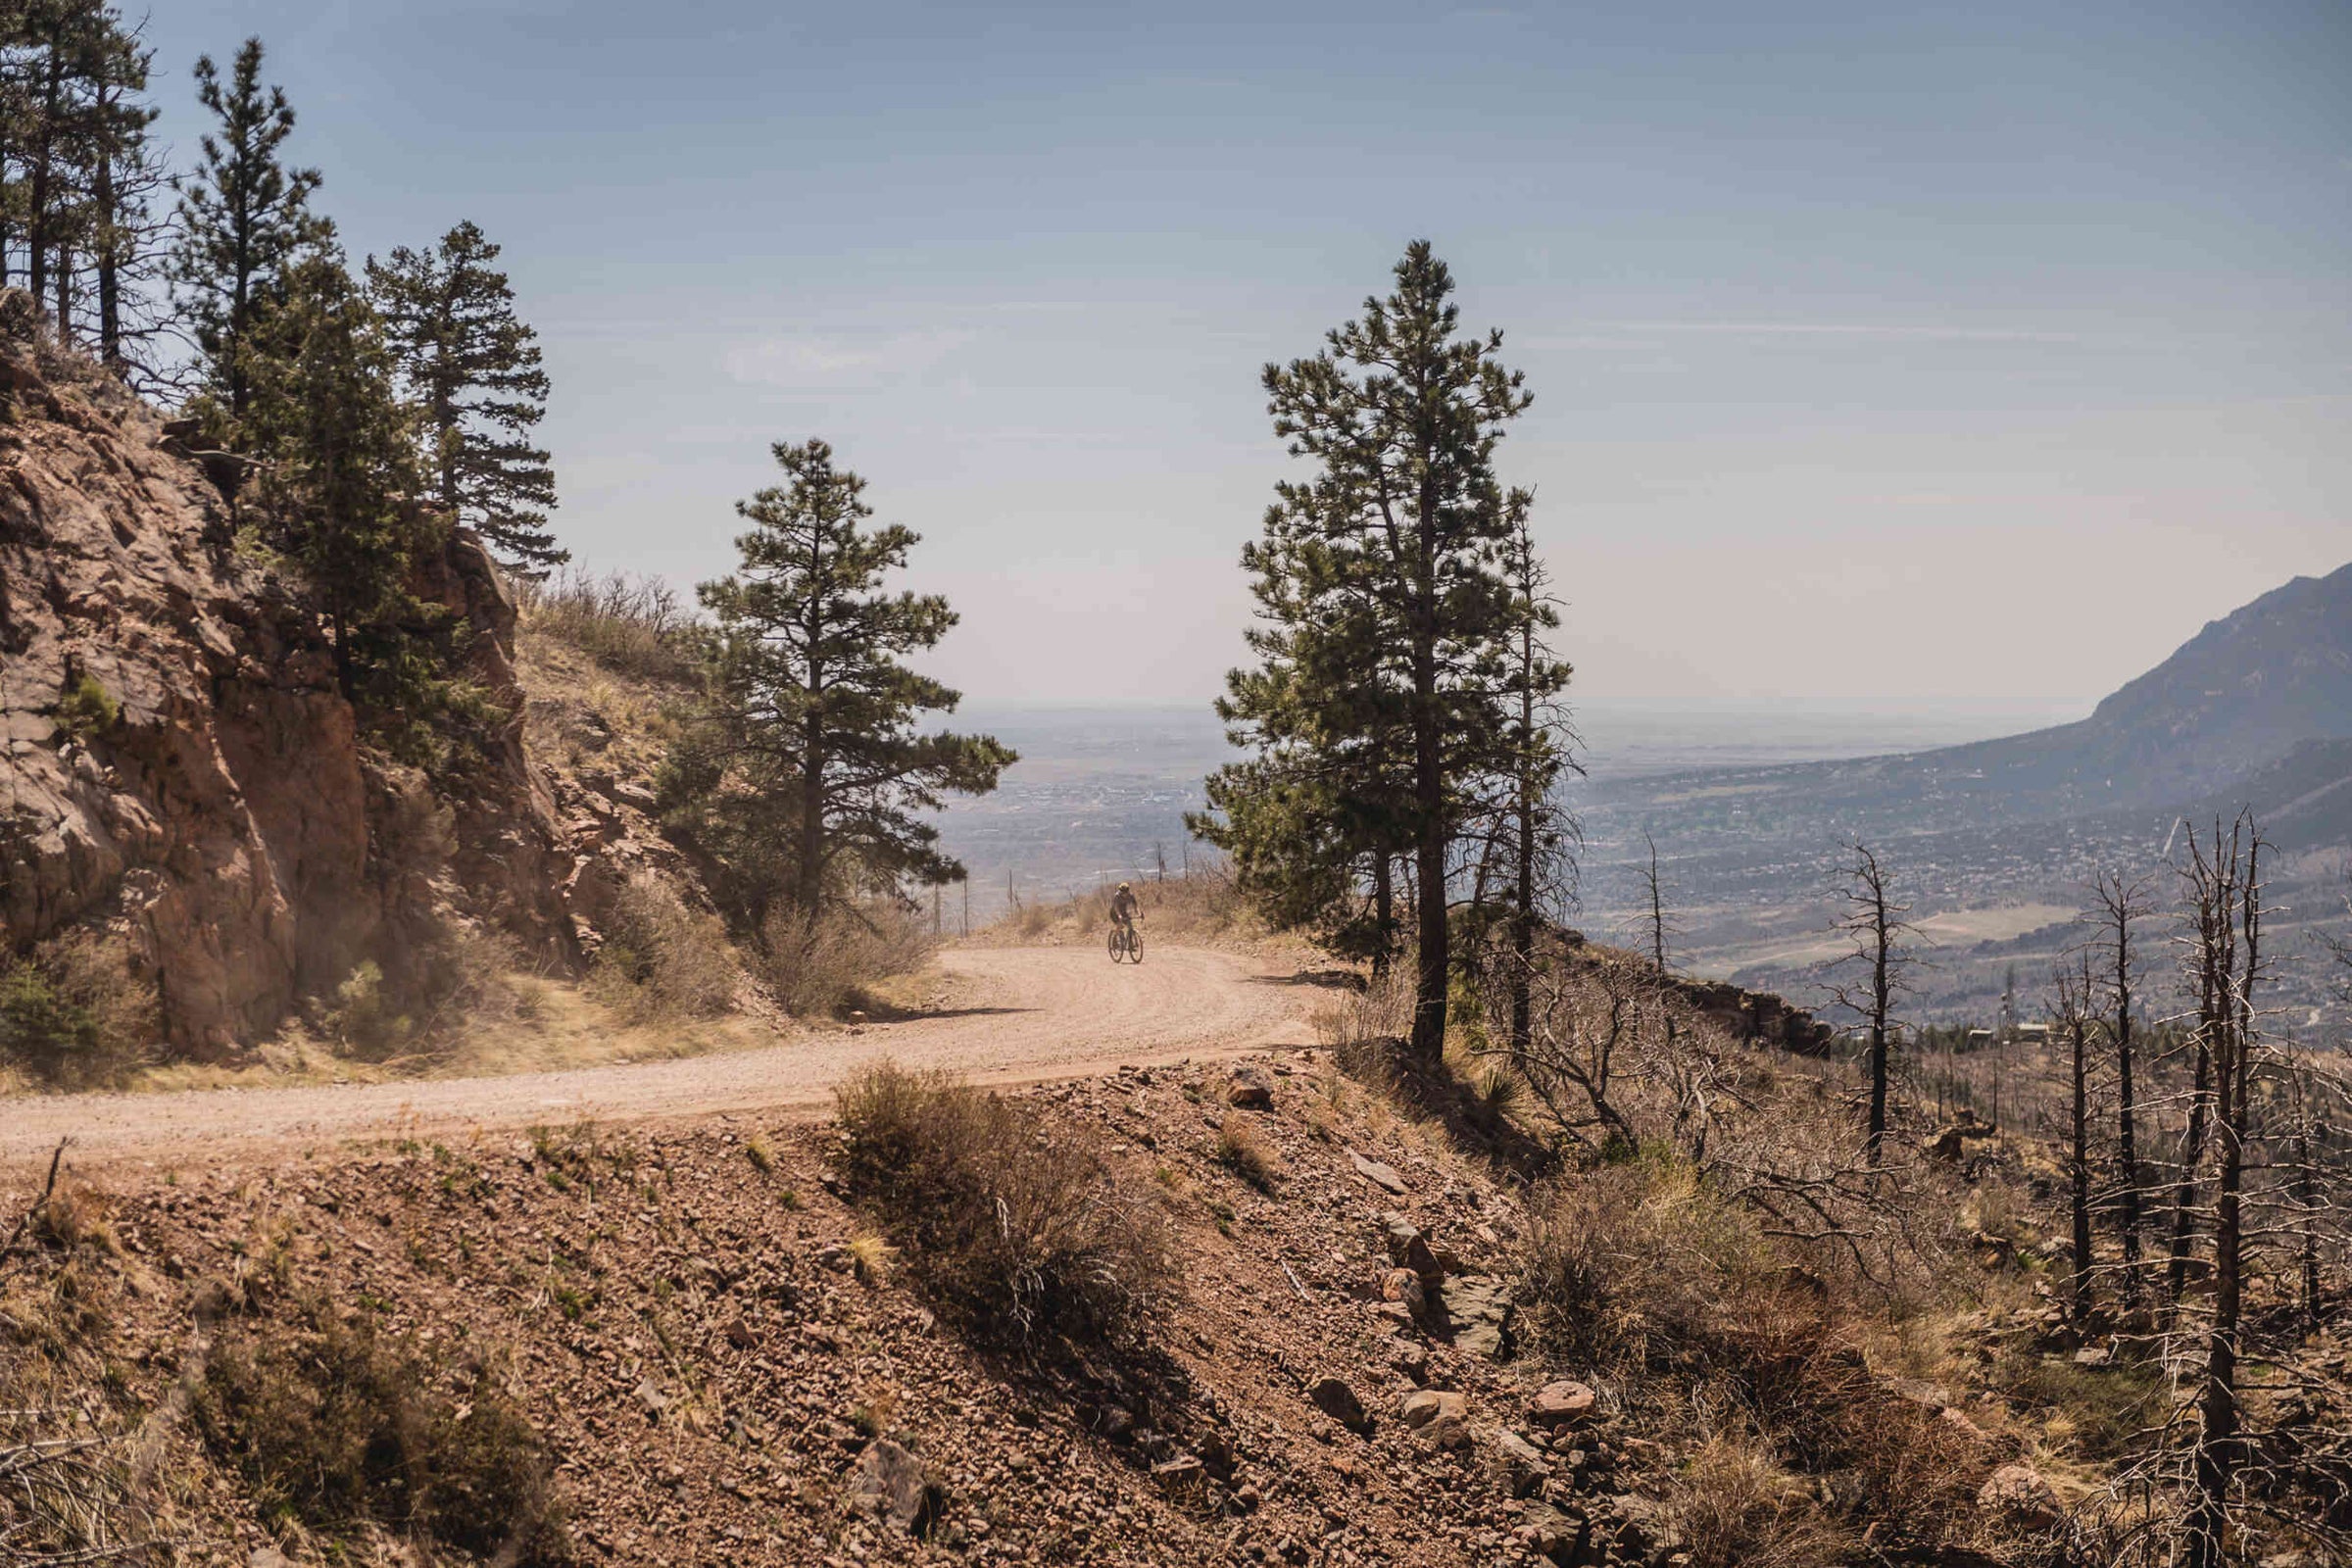 8 Tips for Riding a Road Bike on Dirt